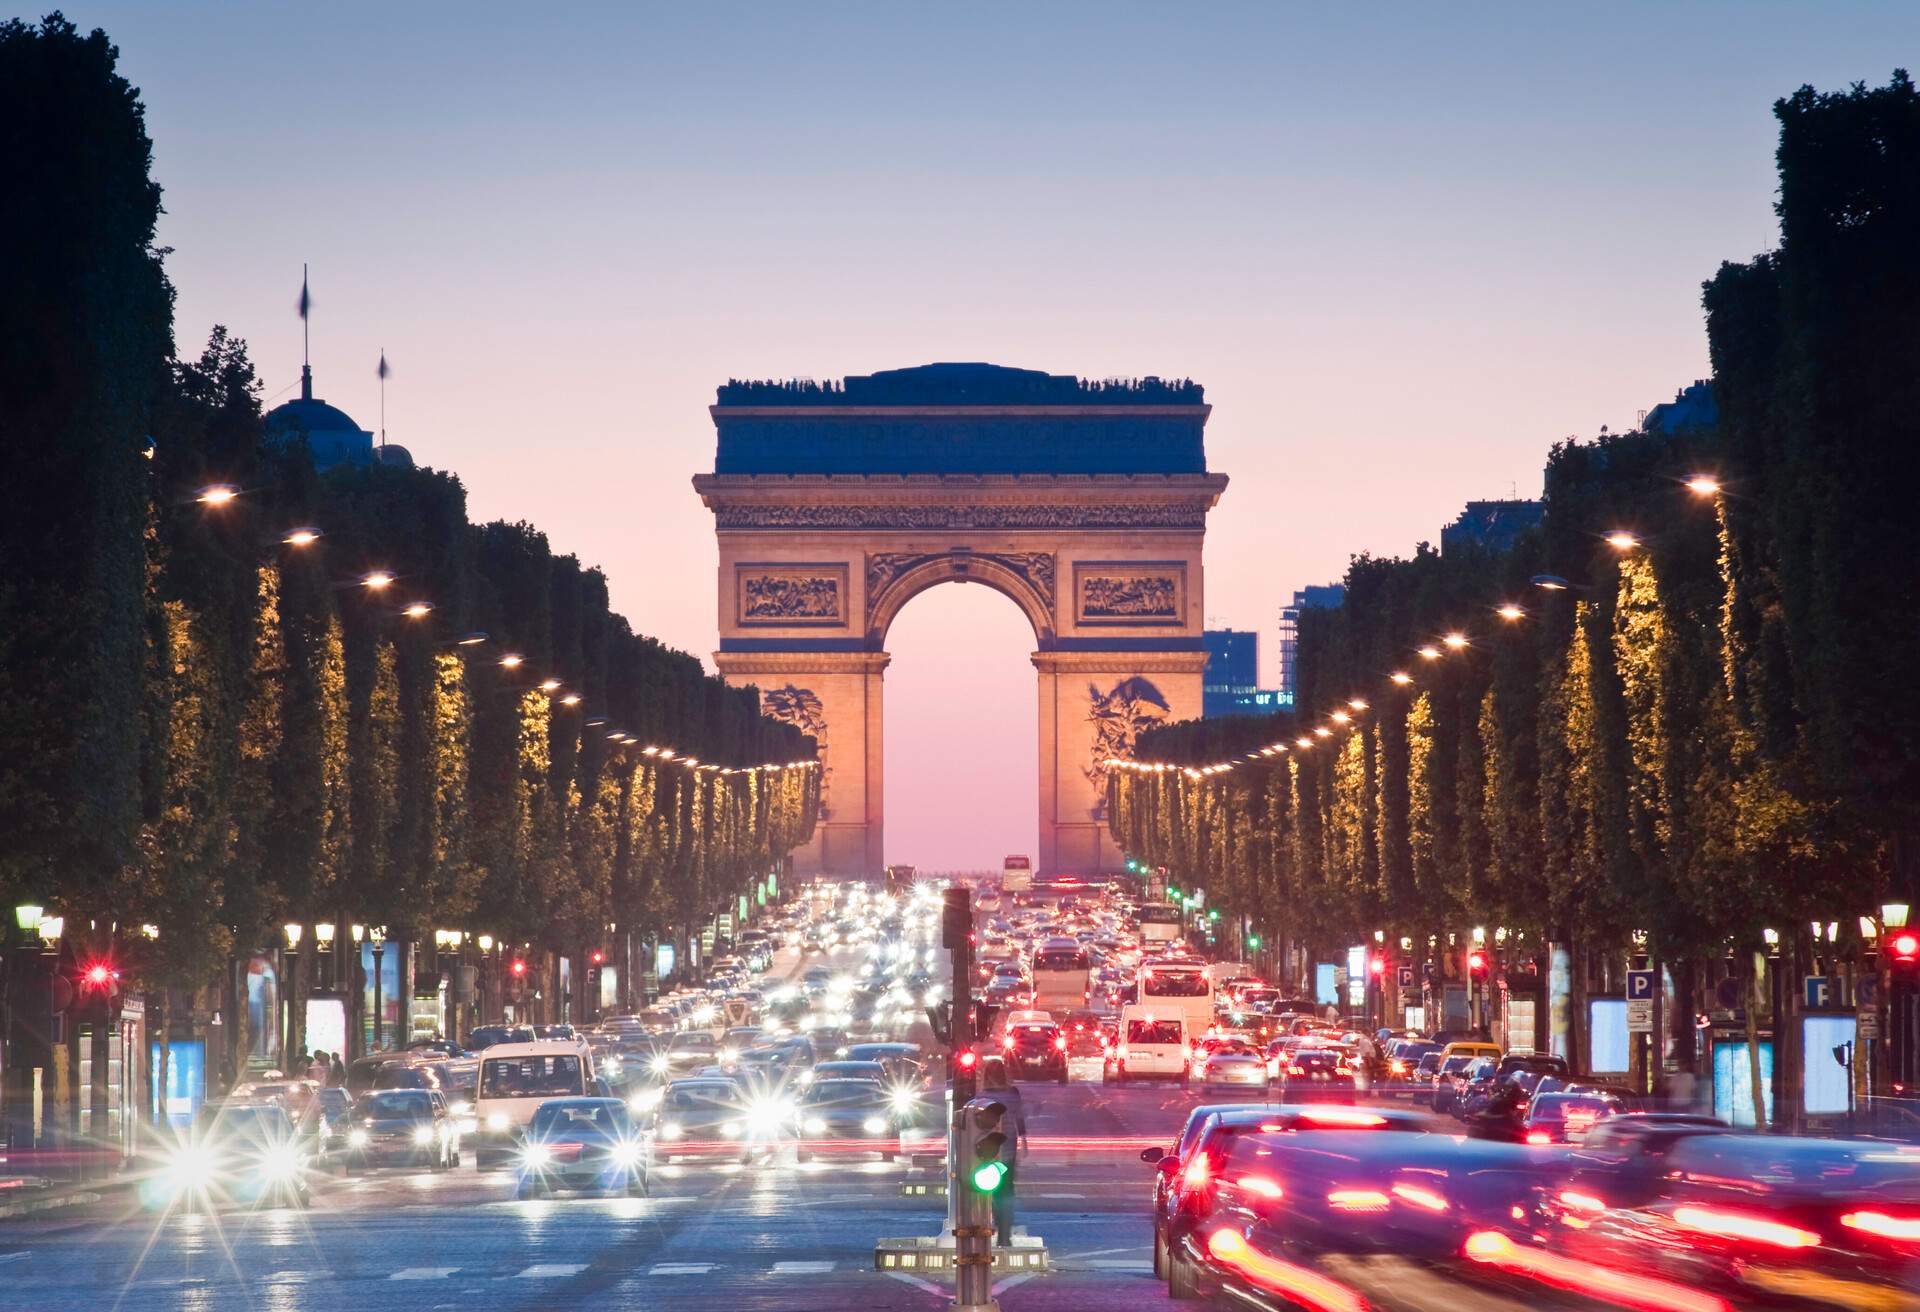 Evening traffic illuminating the Champs-Elysees Avenue with the Arc de Triomphe in the distance.